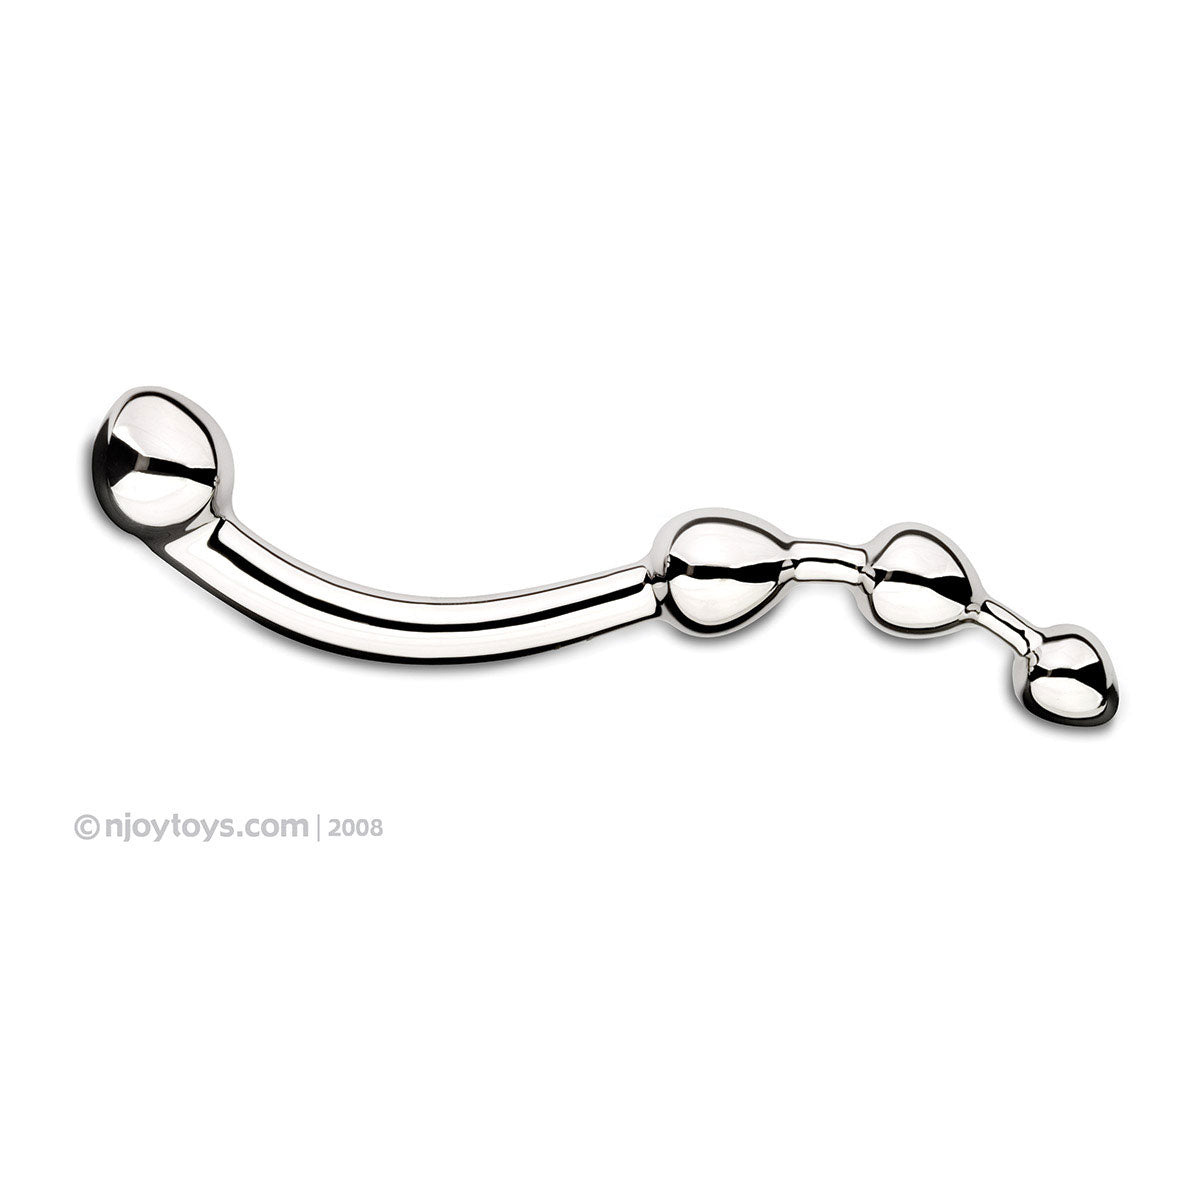 njoy Fun Stainless Steel Wand Dildos with Beads